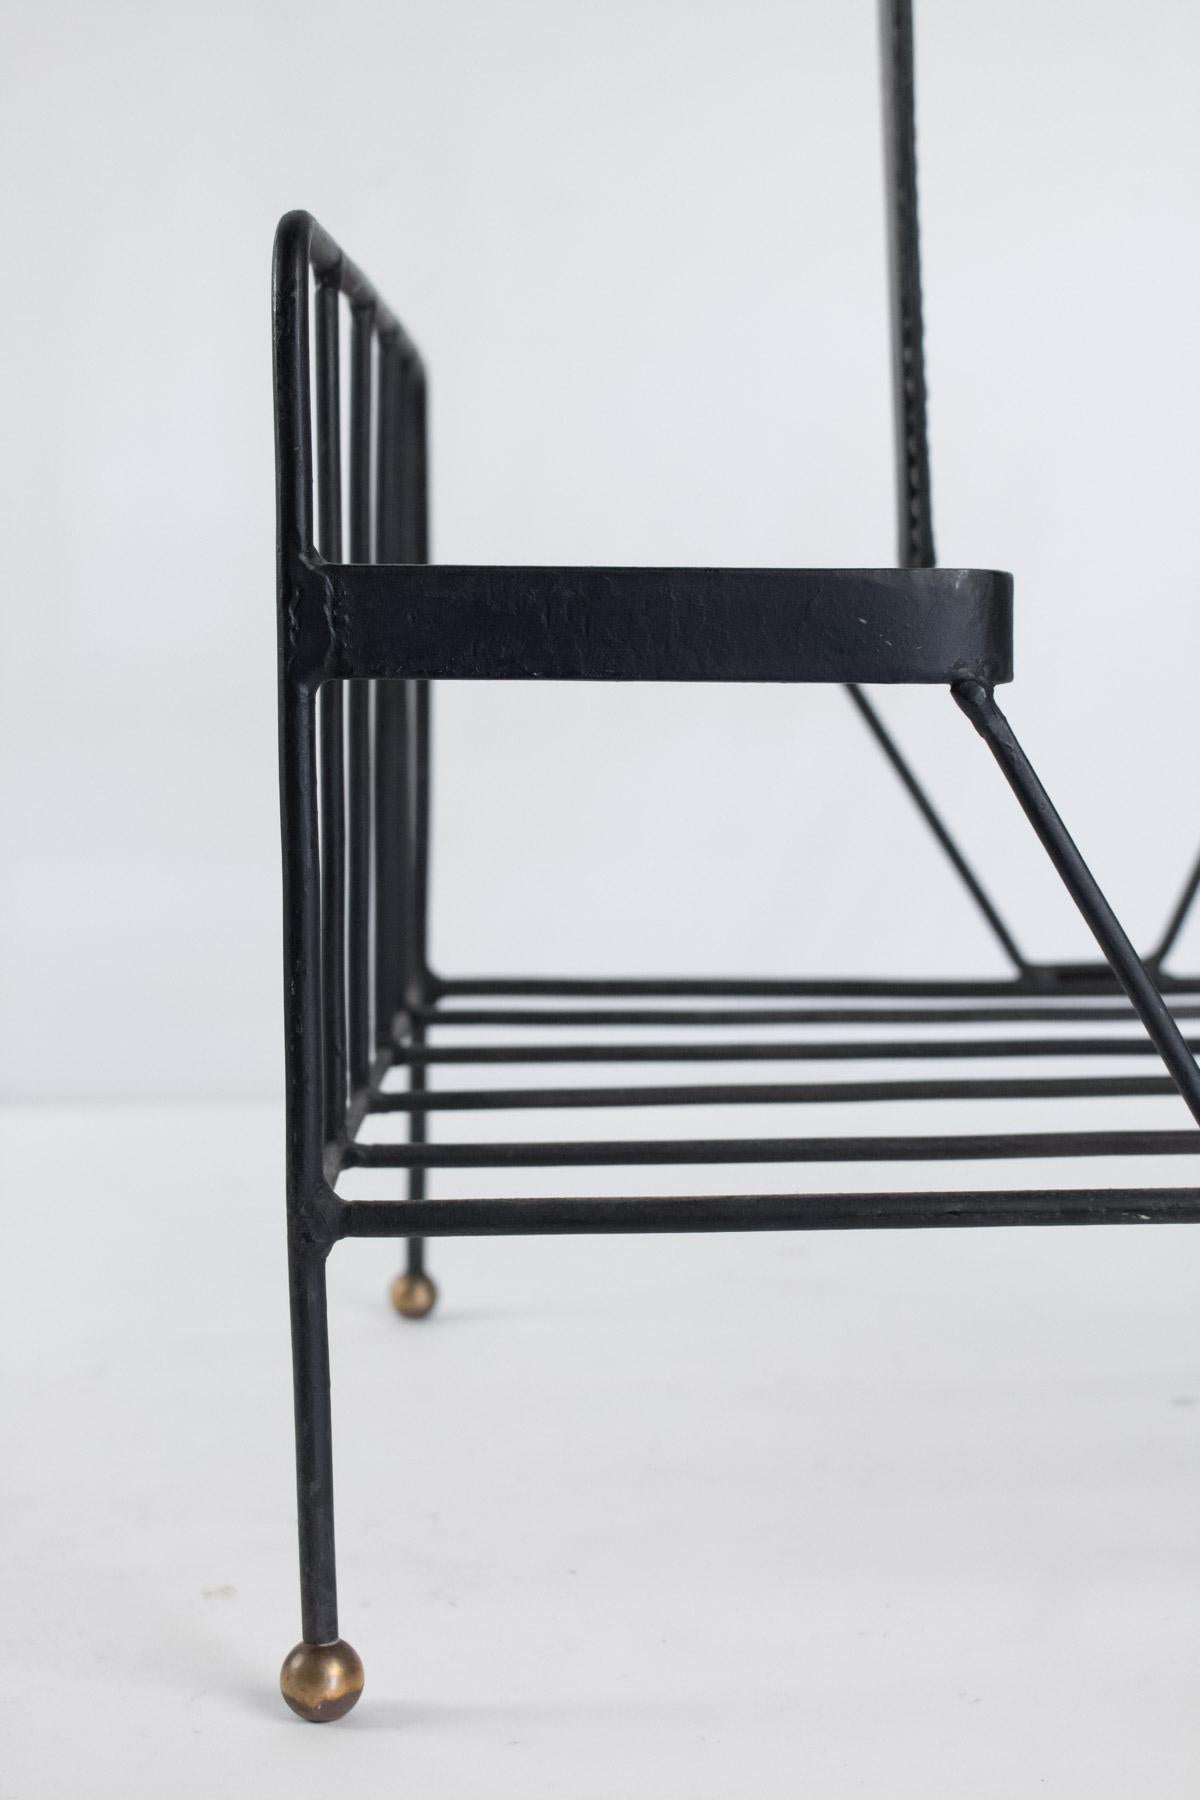 Jacques Adnet iron magazine rack midcentury, leather and steel, 1950 design, brass foot ball
Measures: H 47cm, W 39cm, D 33cm.